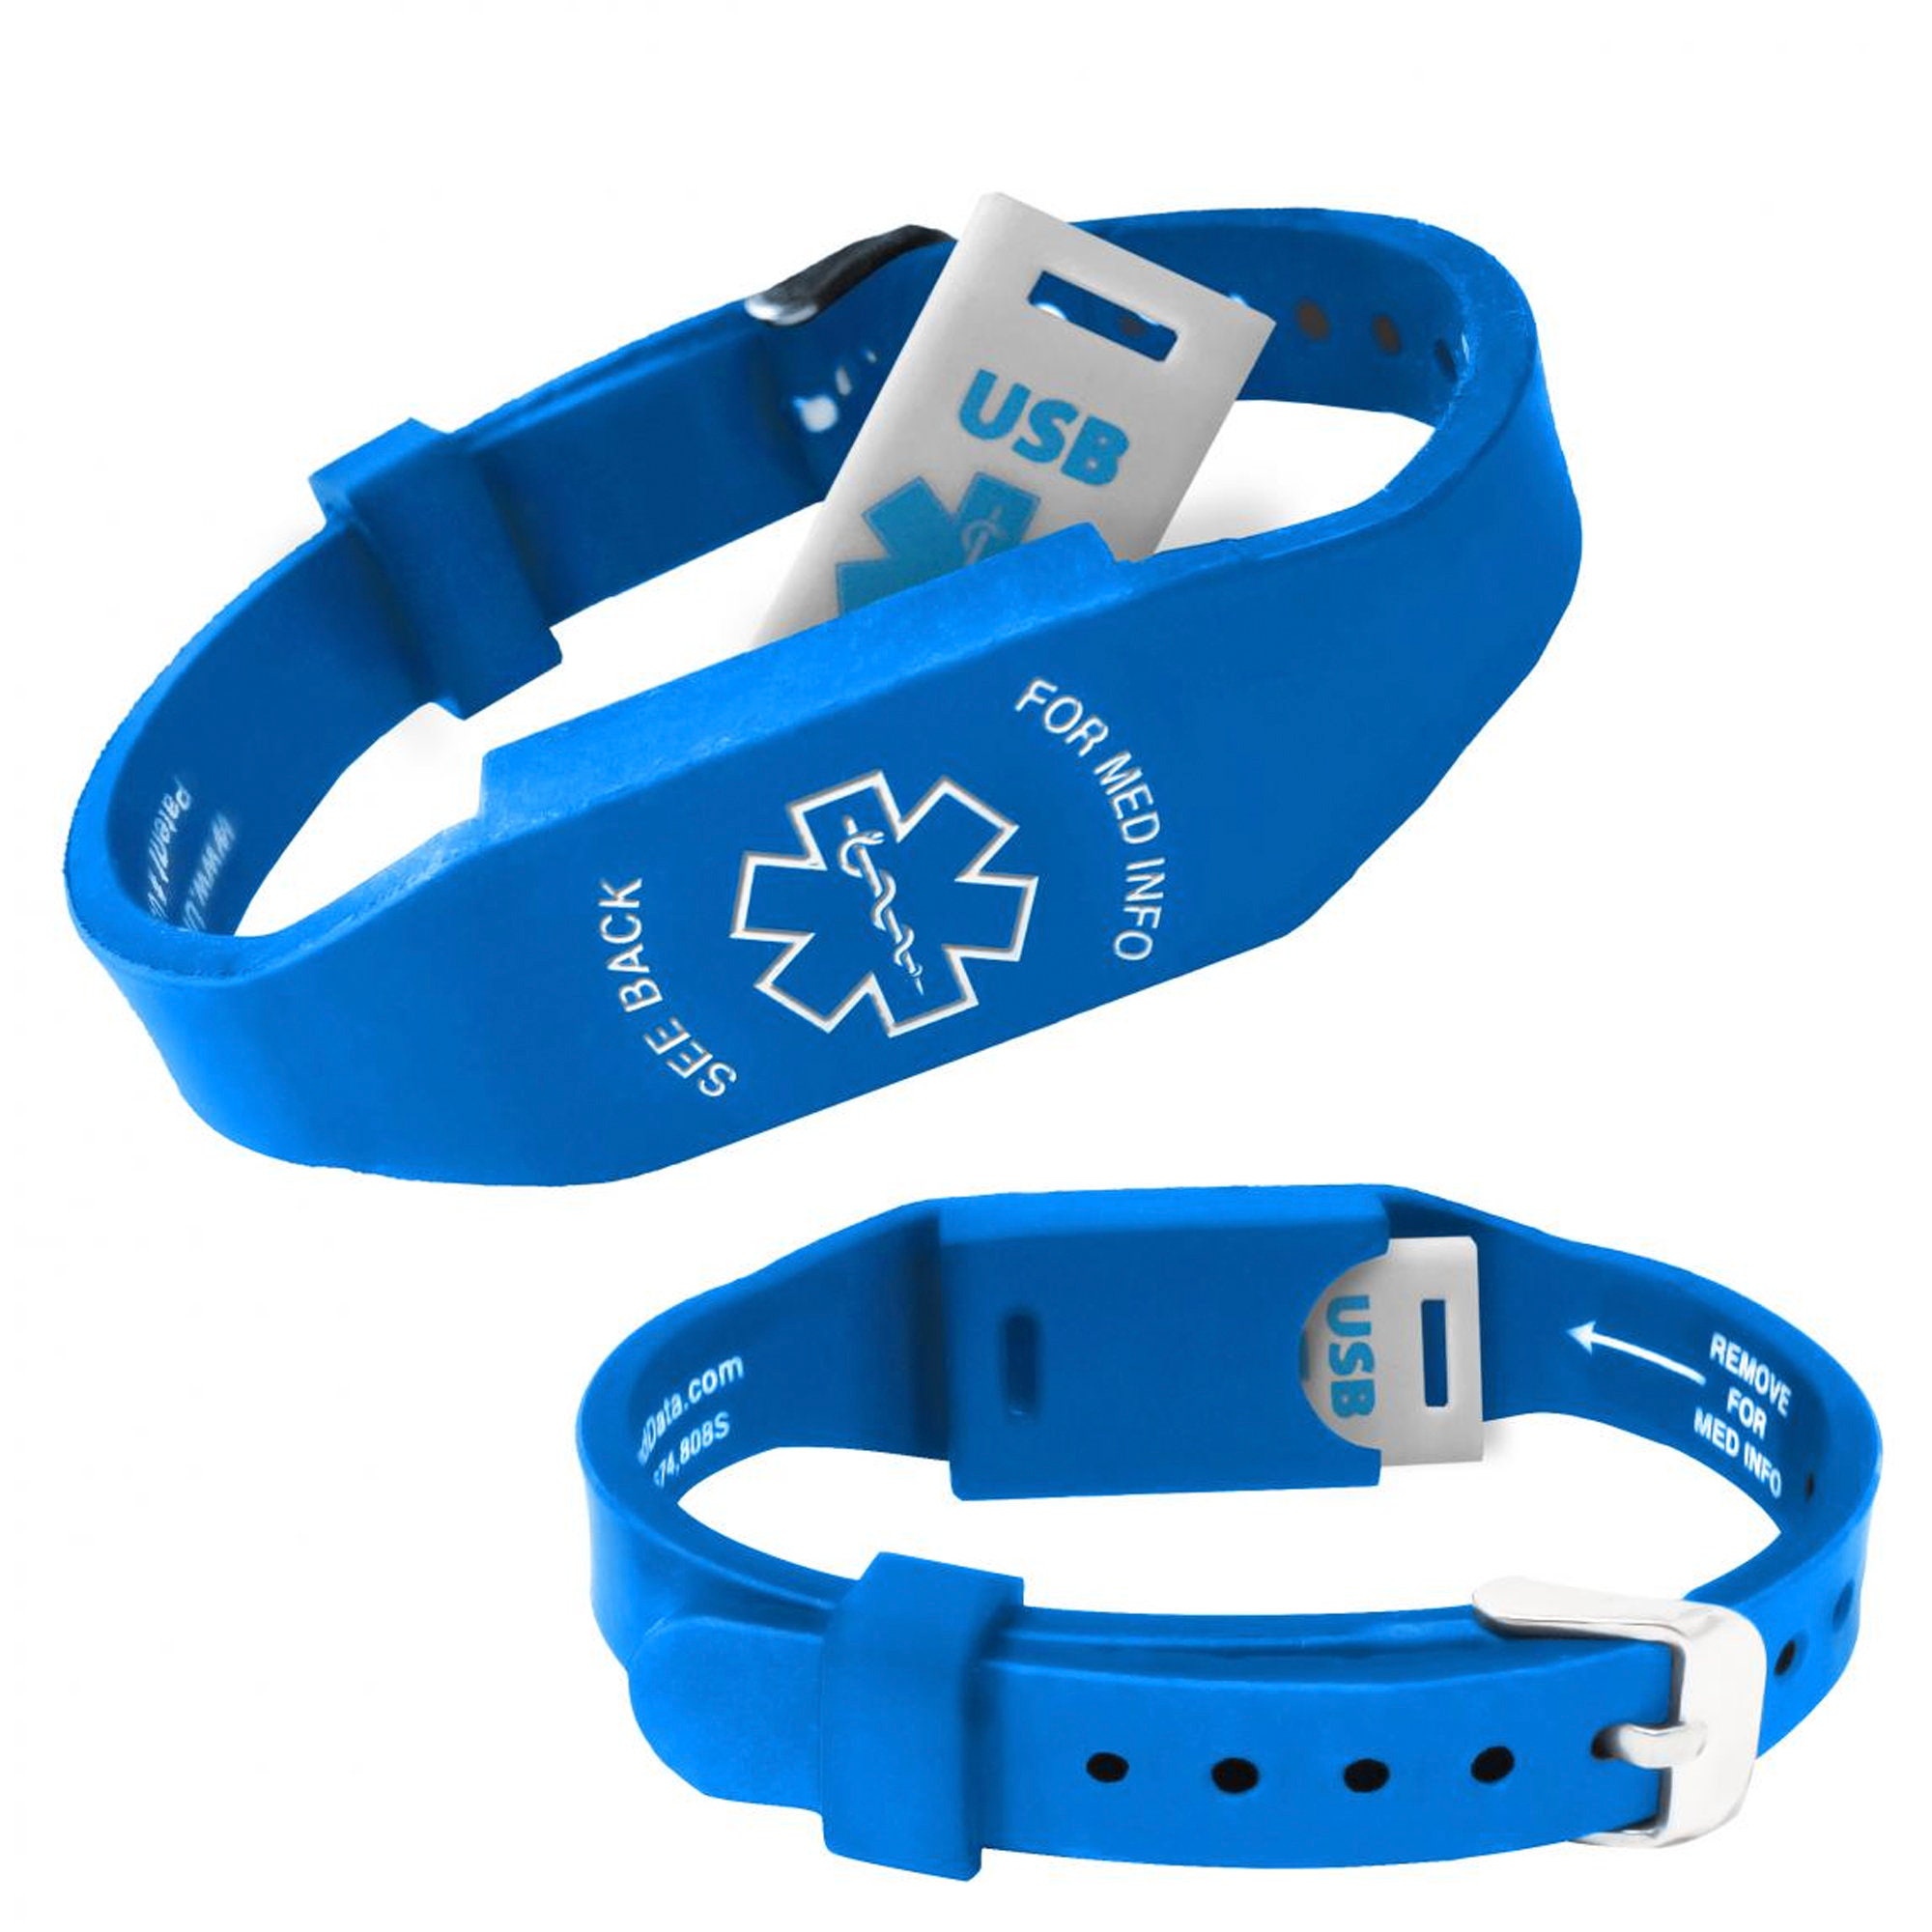 Elite II USB Medical ID Bracelet: Hypoallergenic Waterproof Silicone  Wristband 2GB Waterproof Flash Drive Medical Alert Card. Complimentary  Access PHR (Personal Health Record) - Teal - Walmart.com